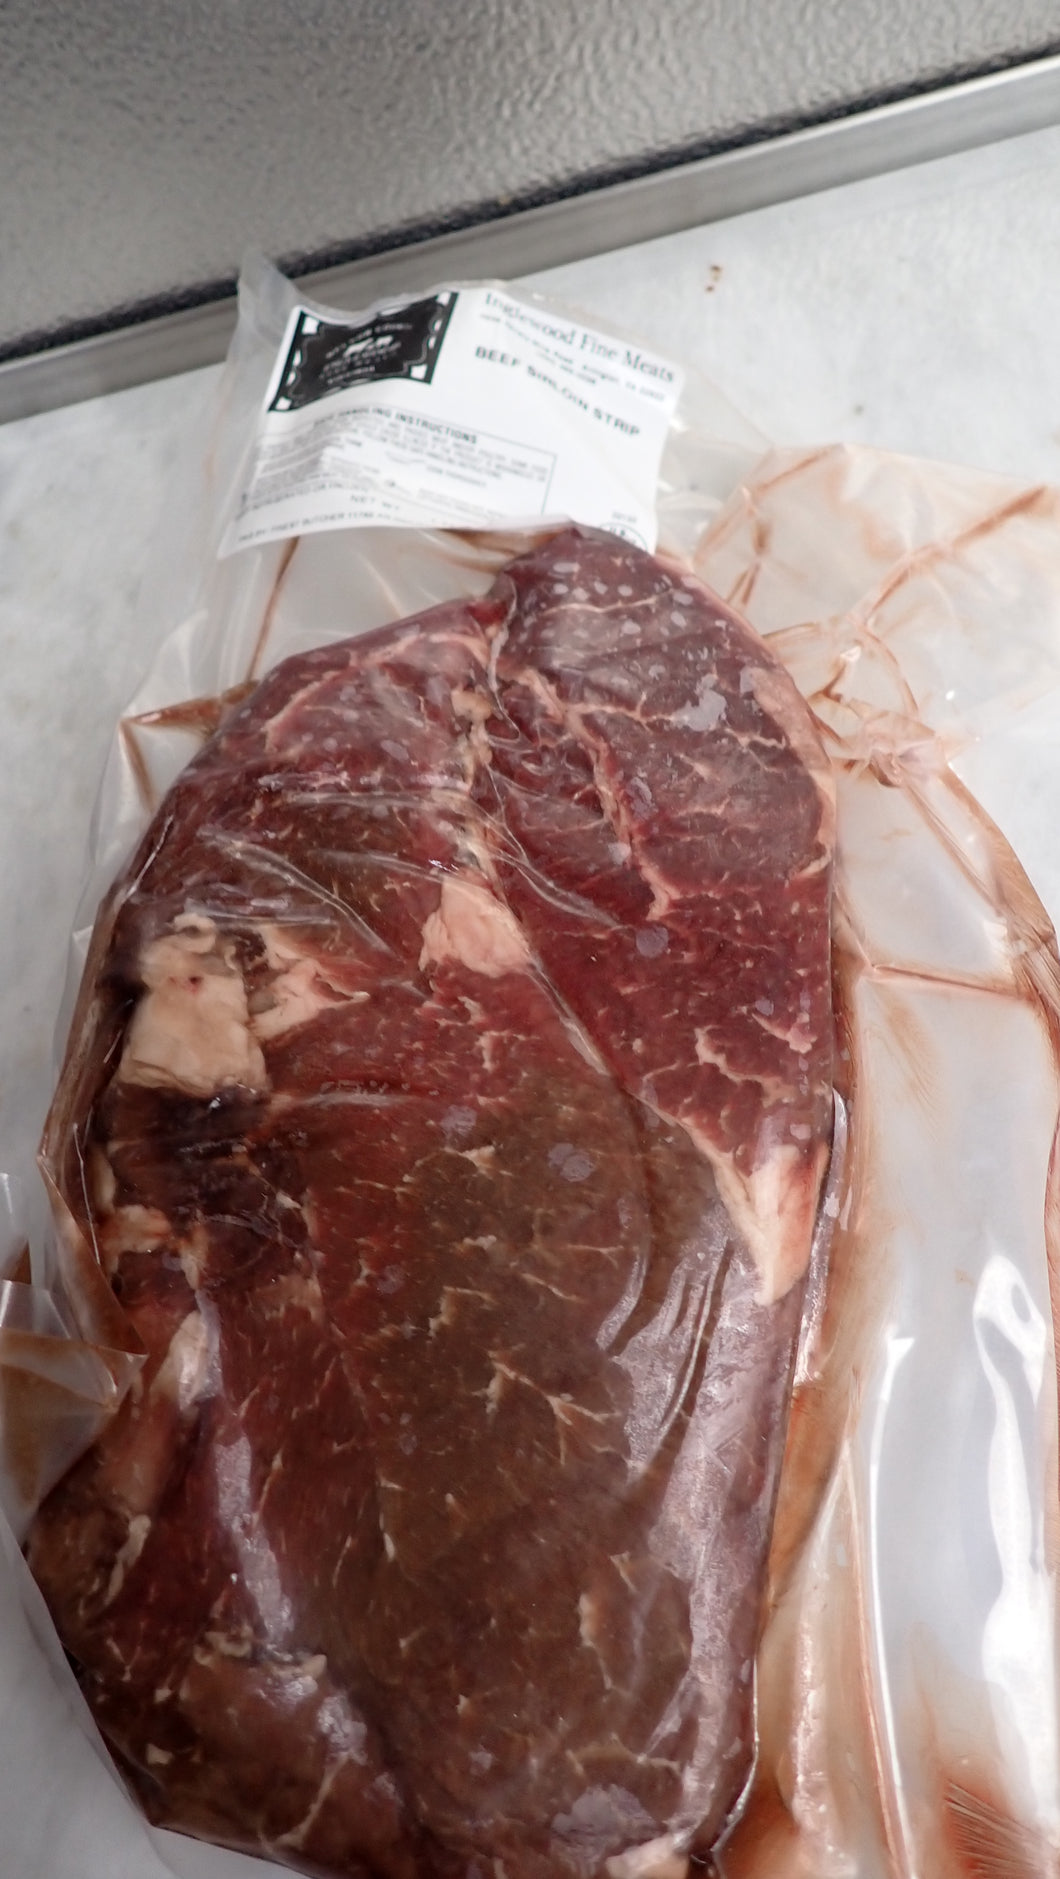 Top Sirloin Steak. All-Natural, Grain Finished - Black Angus Beef